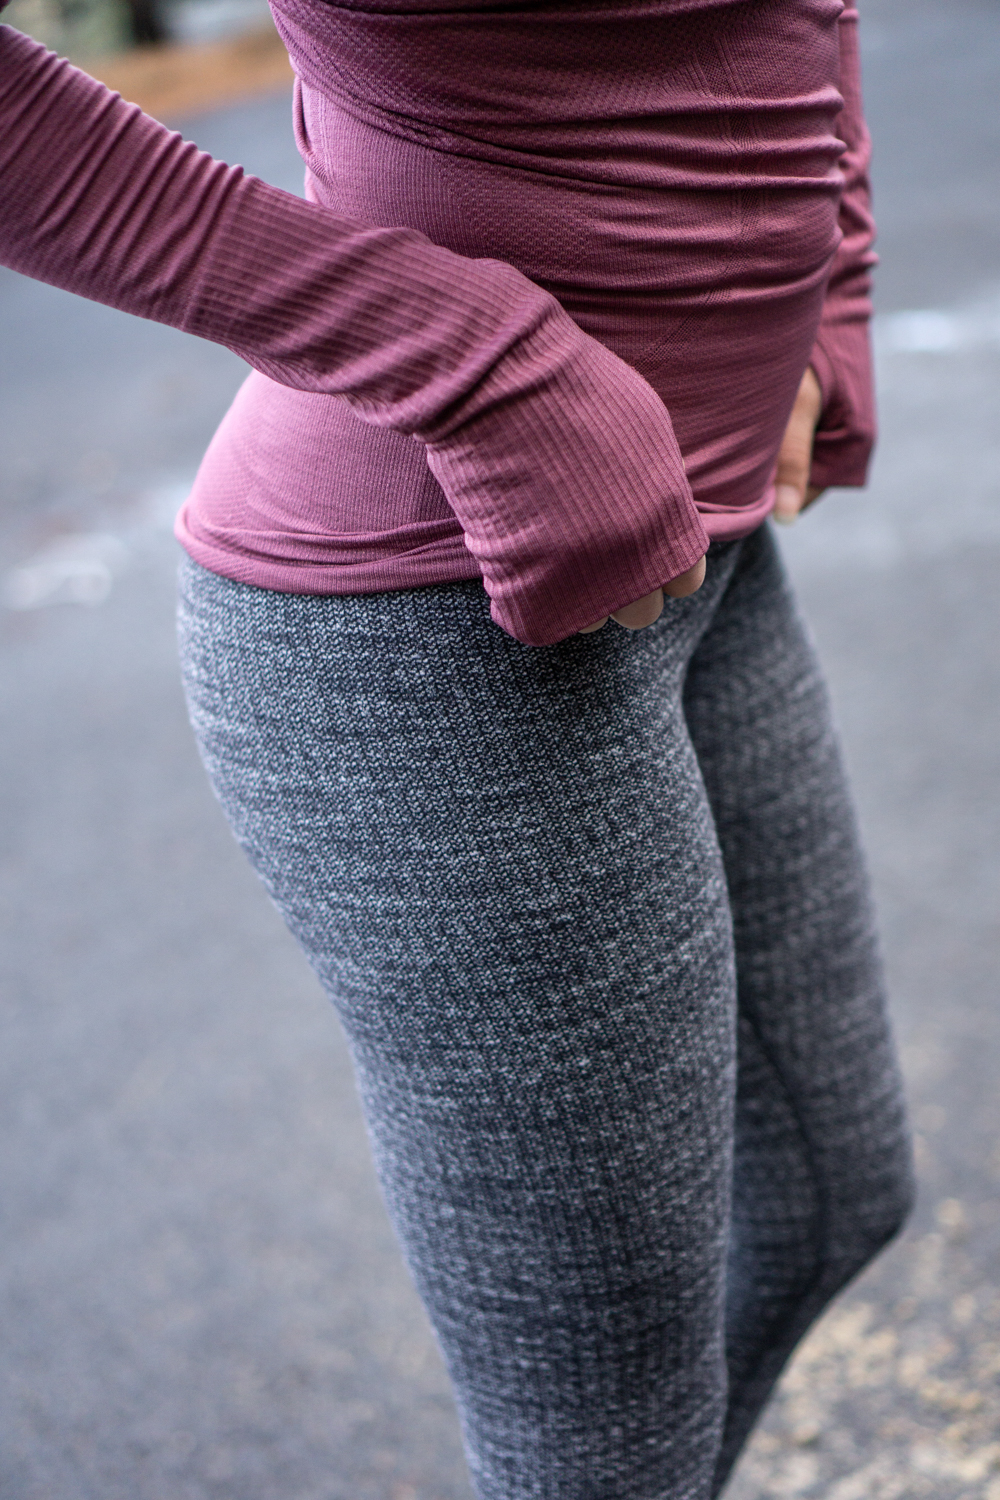 Lululemon Wunder Under Hi Rise Tight 4 Luon Variegated Knit Heathered Black  - $58 - From Caitlin